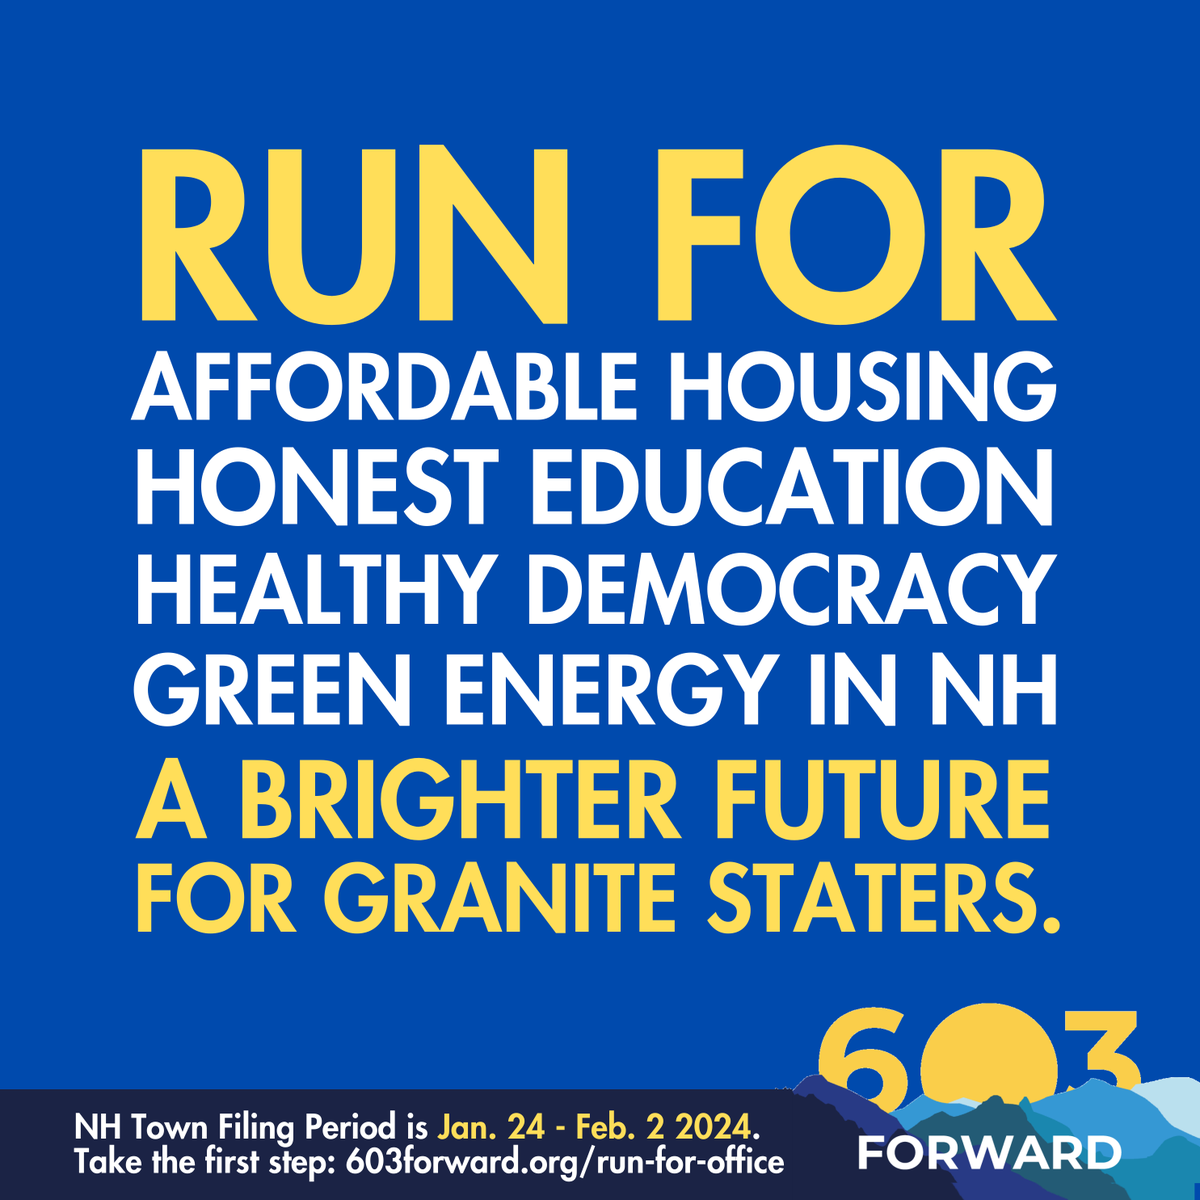 The filing period to run for office in towns across NH is NOW: Jan. 24th - Feb. 2nd. Take the first step with us @ 603forward.org/run-for-office + get out there and run for office! #NHPolitics #RunForOffice